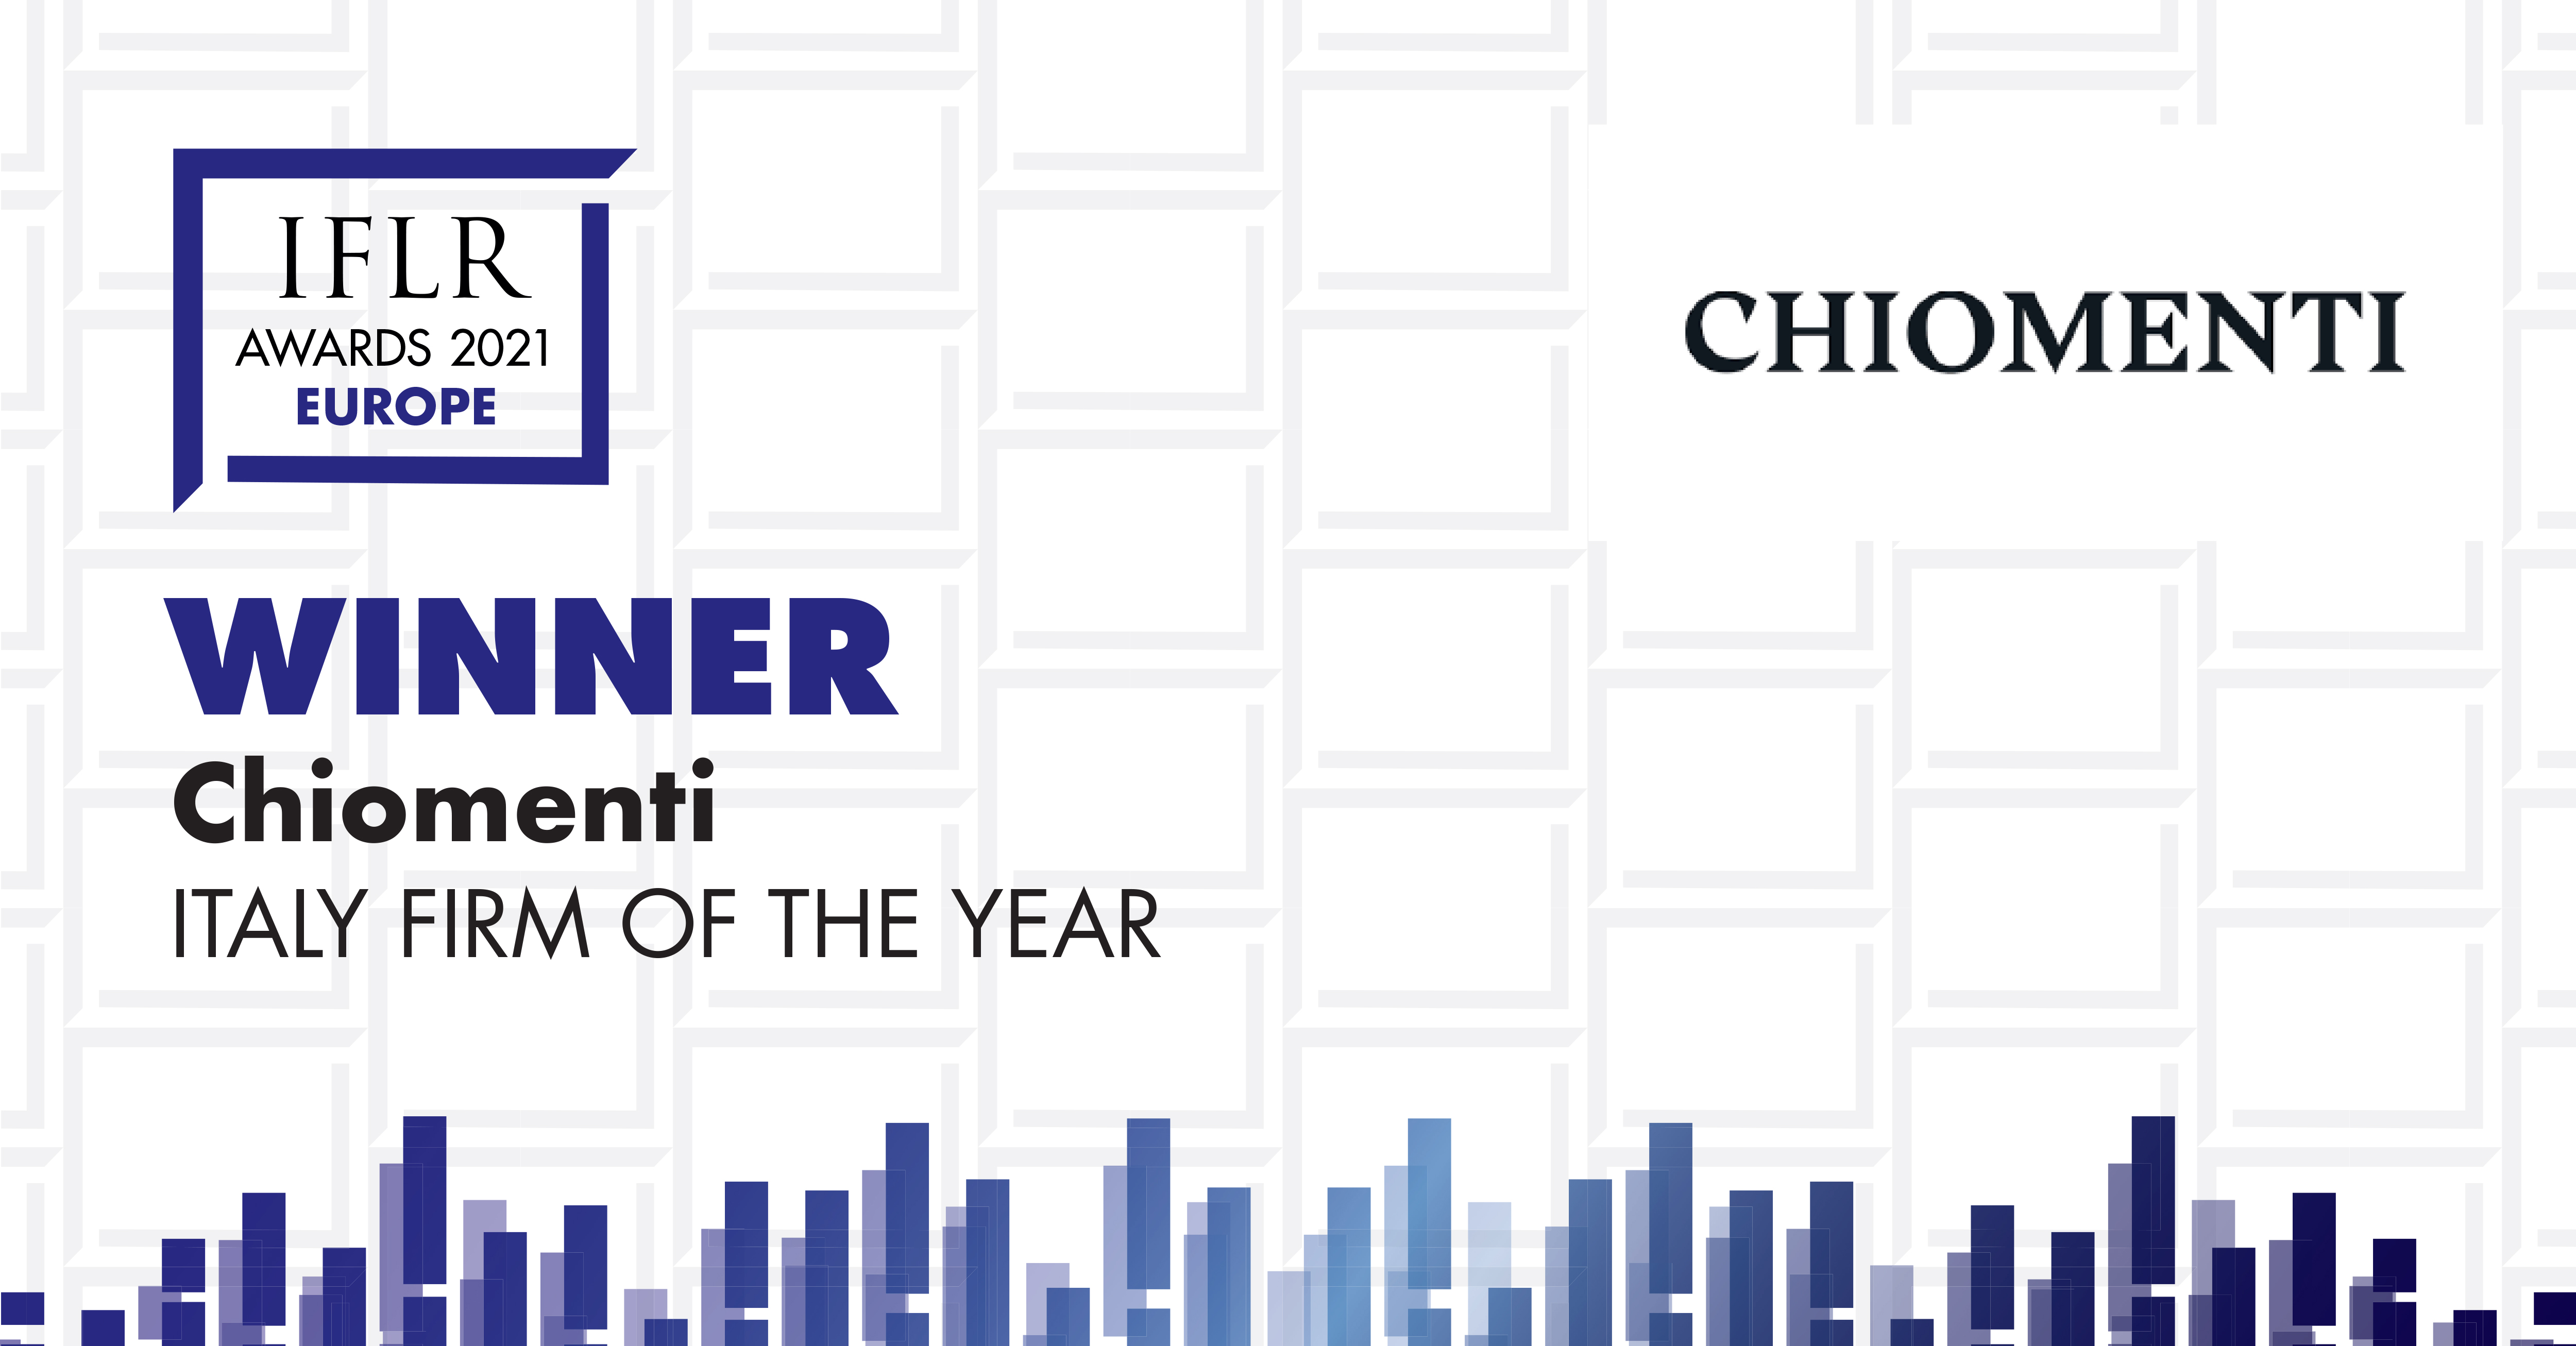 IFLR Europe Awards | Italian Law Firm of the Year